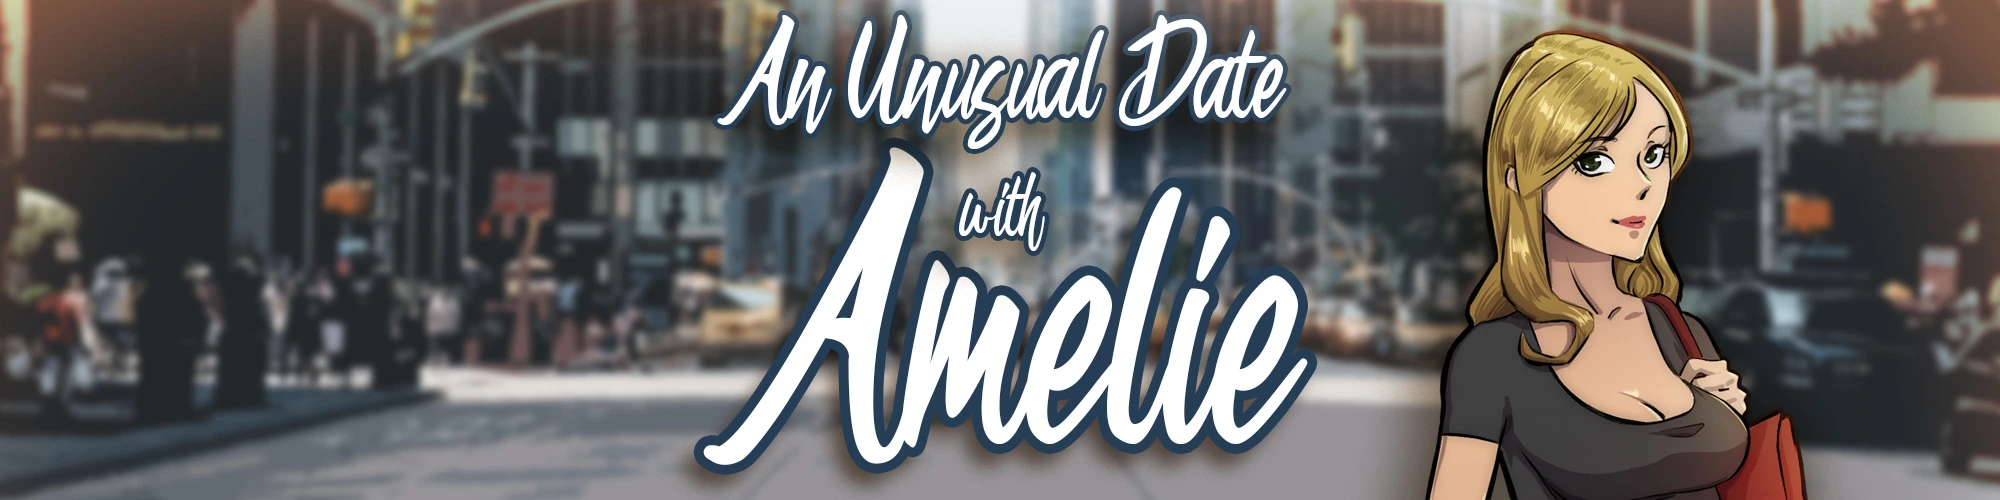 An Unusual Date: Amelie [v1.0] main image